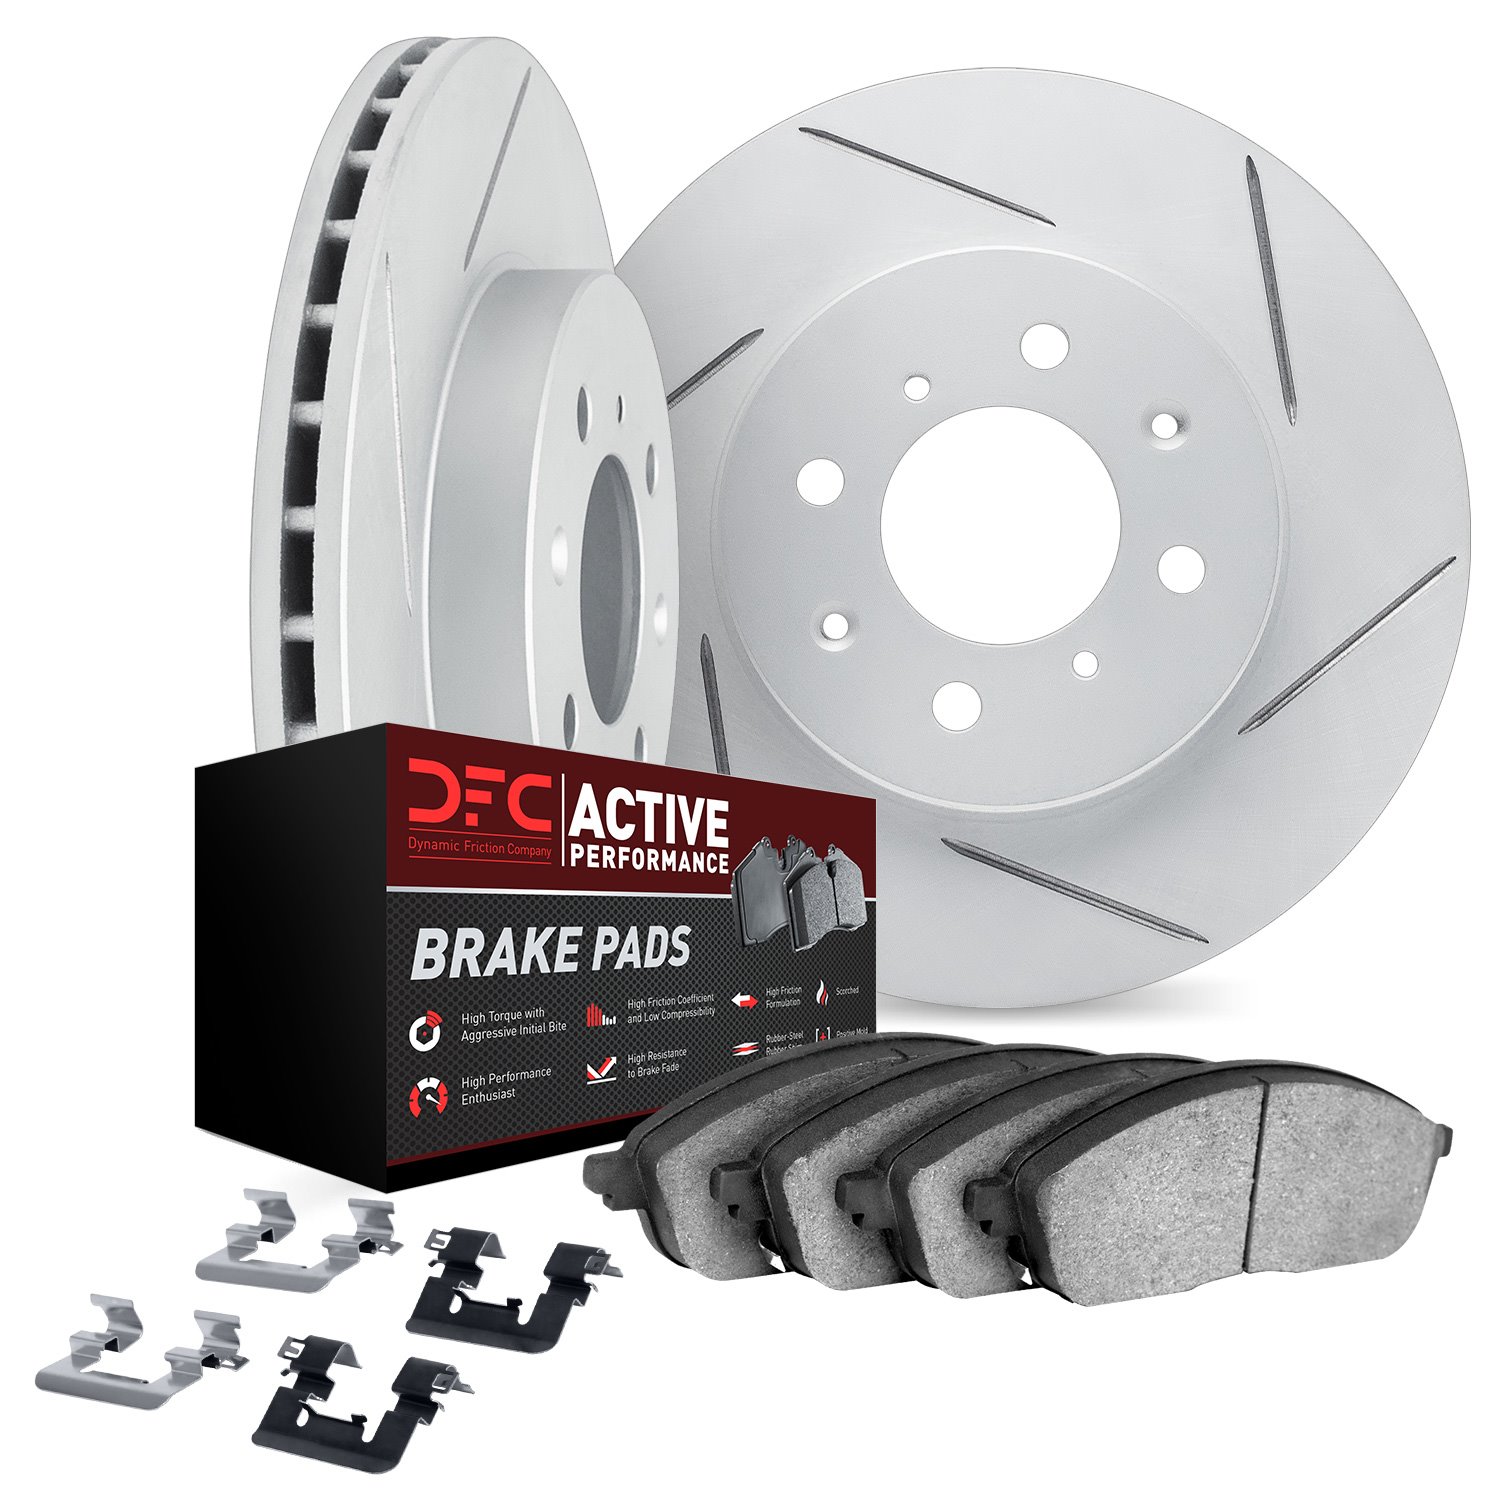 2712-59010 Geoperformance Slotted Brake Rotors with Active Performance Pads Kits & Hardware, 2003-2008 Acura/Honda, Position: Fr